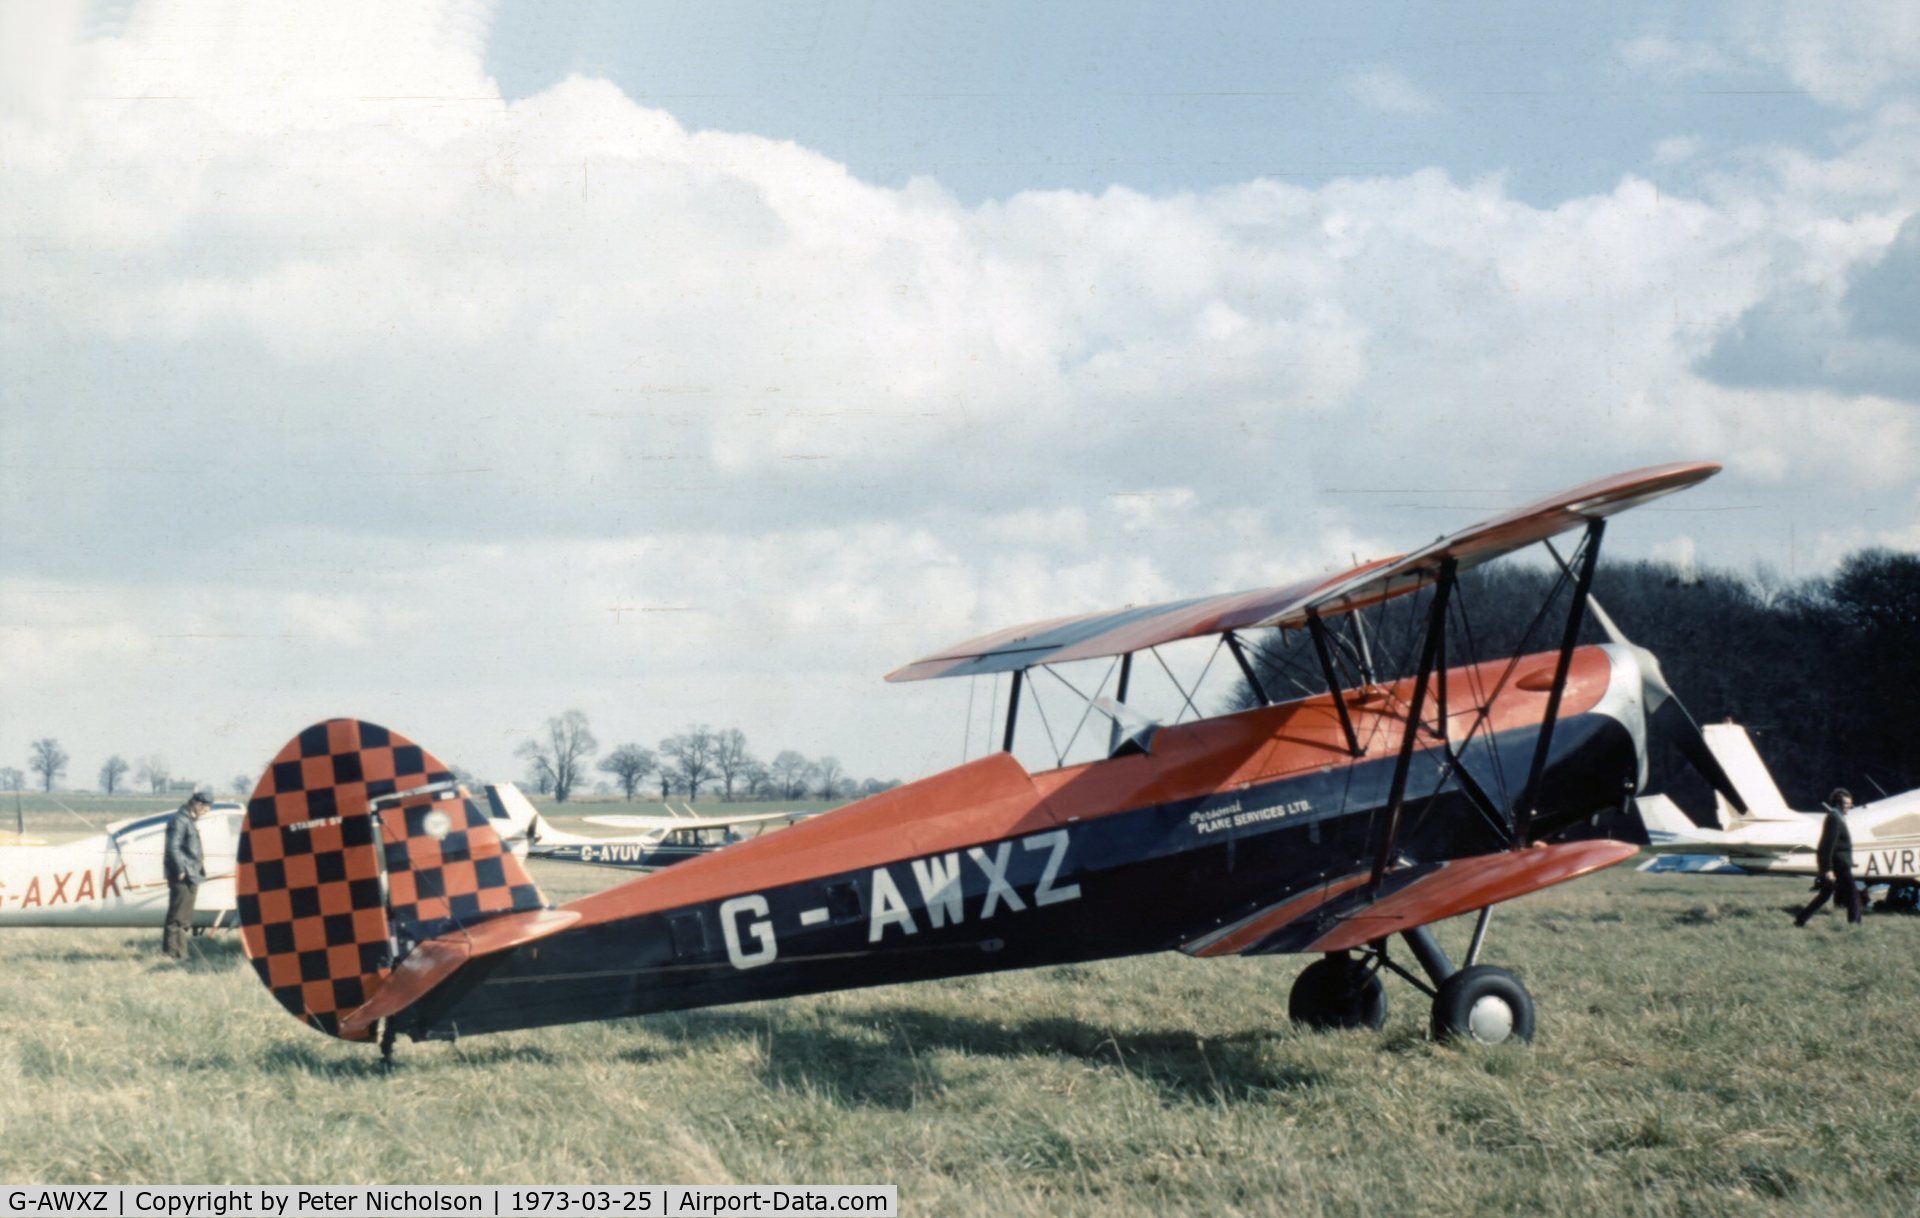 G-AWXZ, 1949 Stampe-Vertongen SV-4C C/N 360, This Stampe attended the Shuttleworth Collection display at Old Warden in the Spring of 1973.